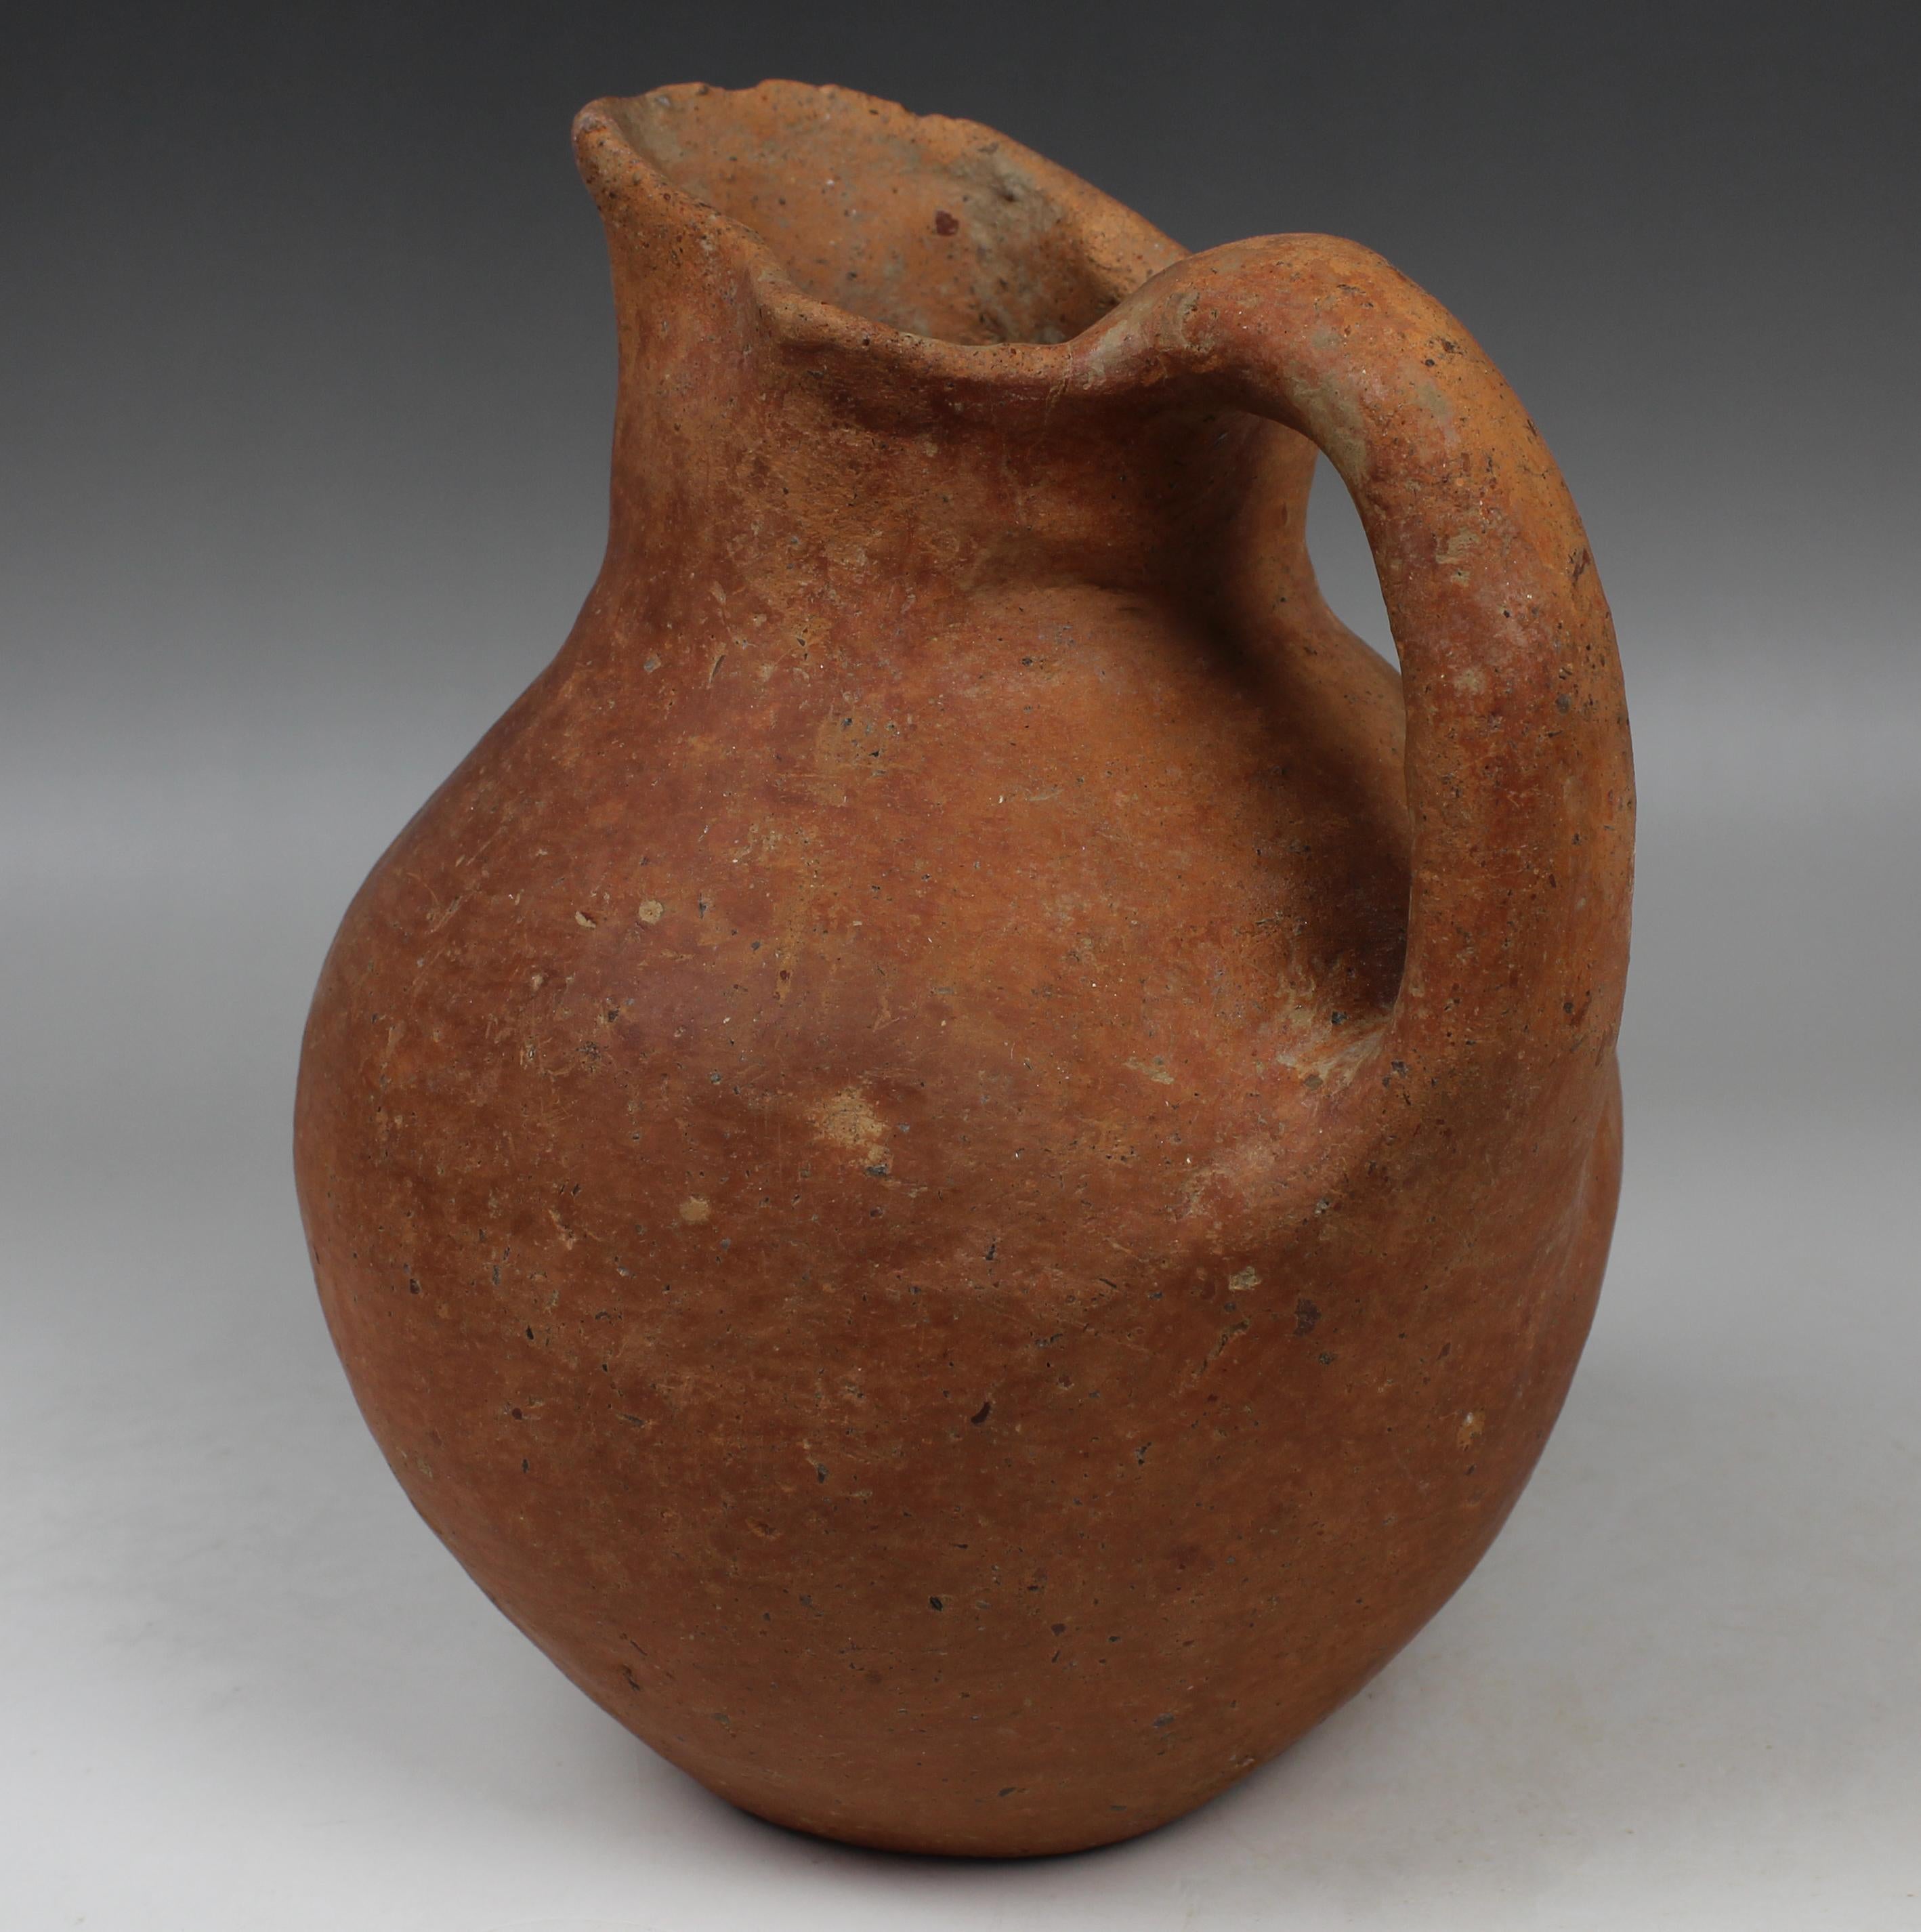 ITEM: Beaked jug
MATERIAL: Pottery
CULTURE: Etruscan
PERIOD: 7th Century B.C
DIMENSIONS: 185 mm x 140 mm
CONDITION: Good condition
PROVENANCE: Ex German private collection, K.F., from and old family estate, acquired before 1980s

Comes with